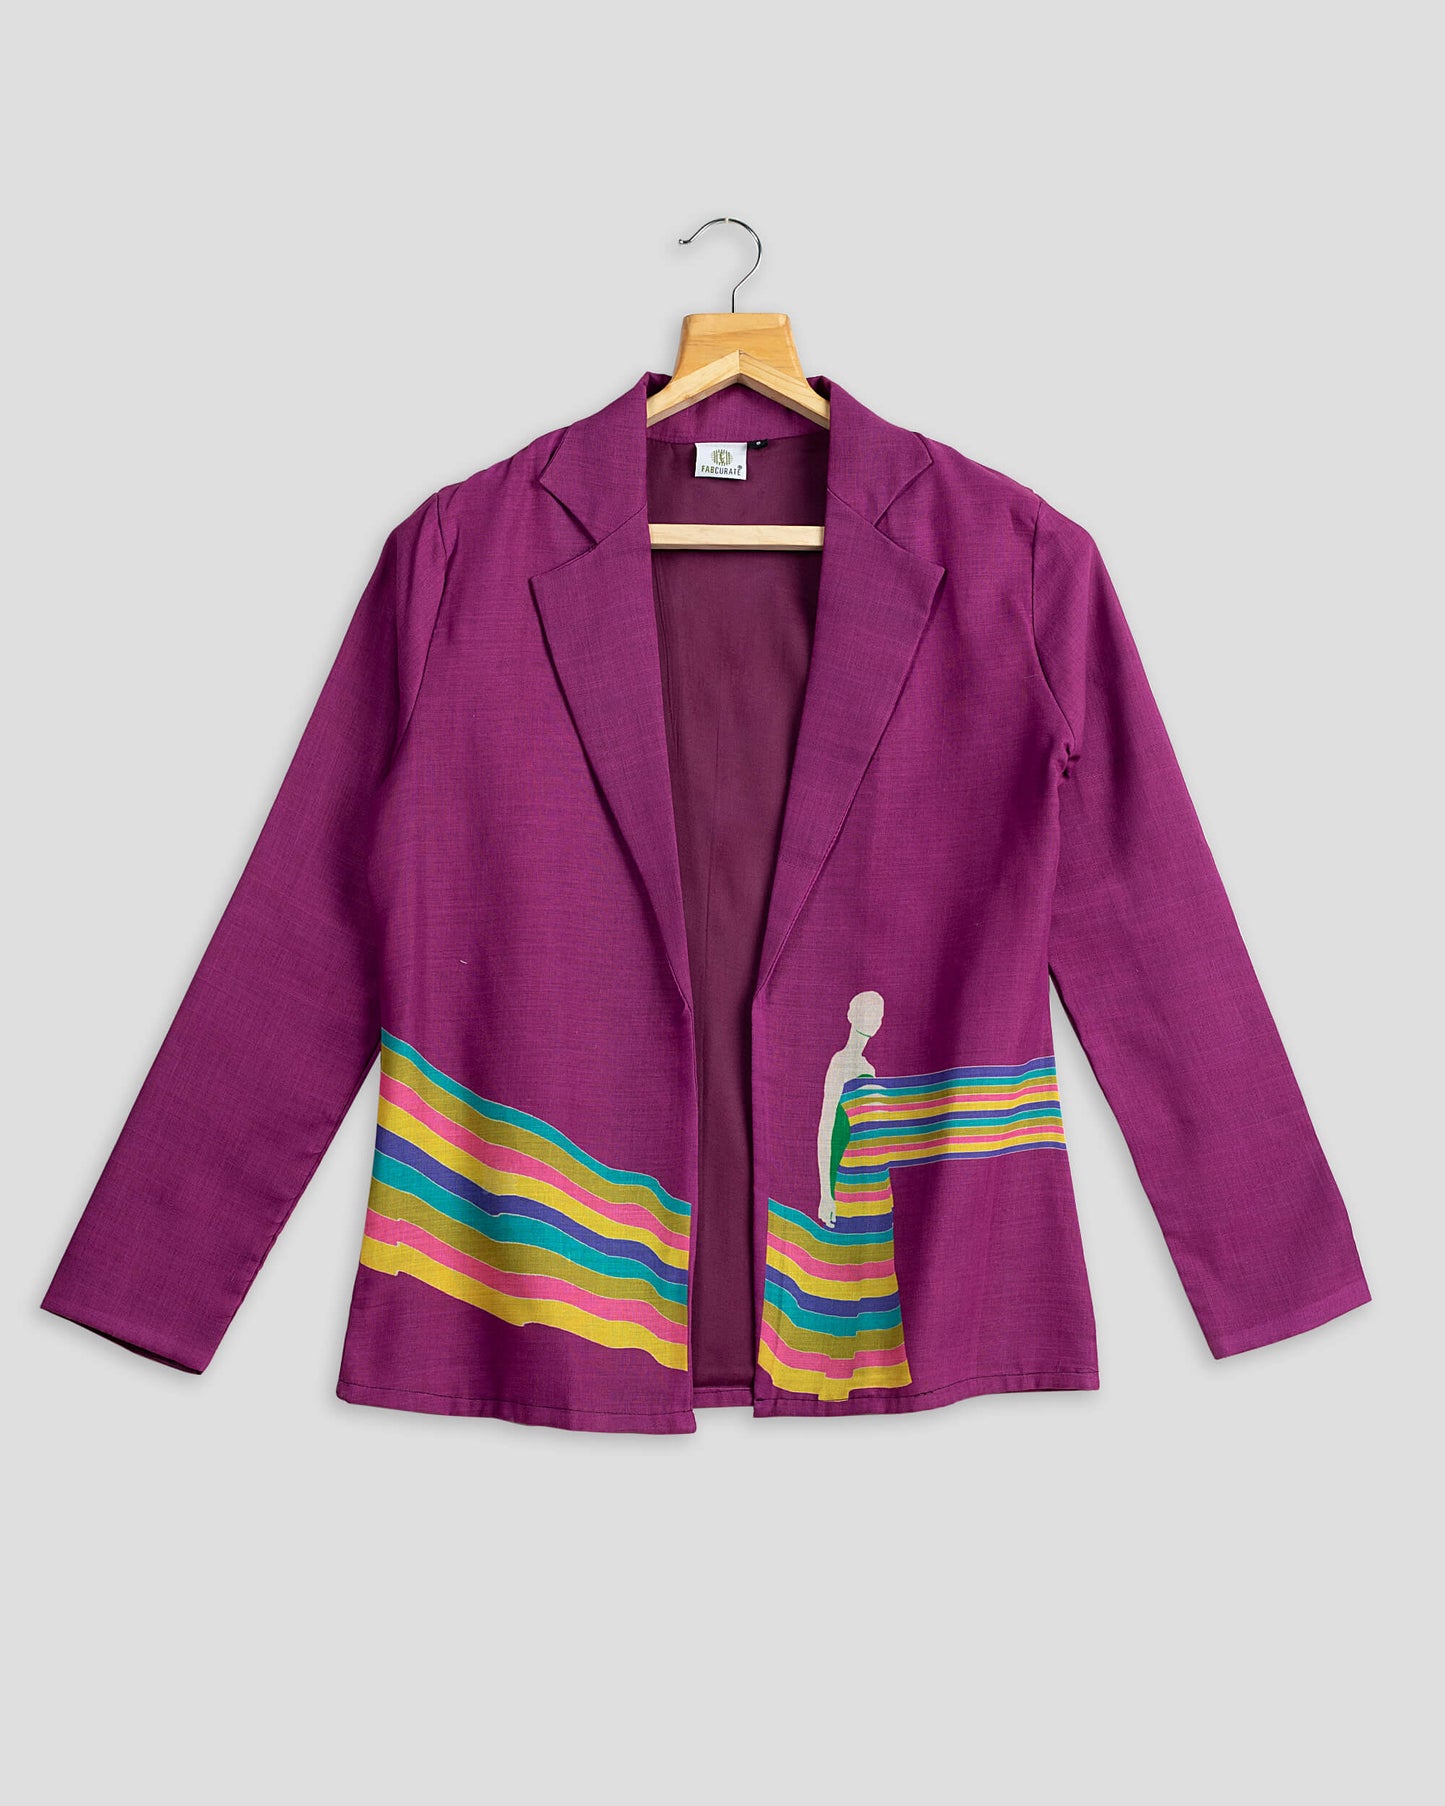 Quirky Fashionable Jacket For Women